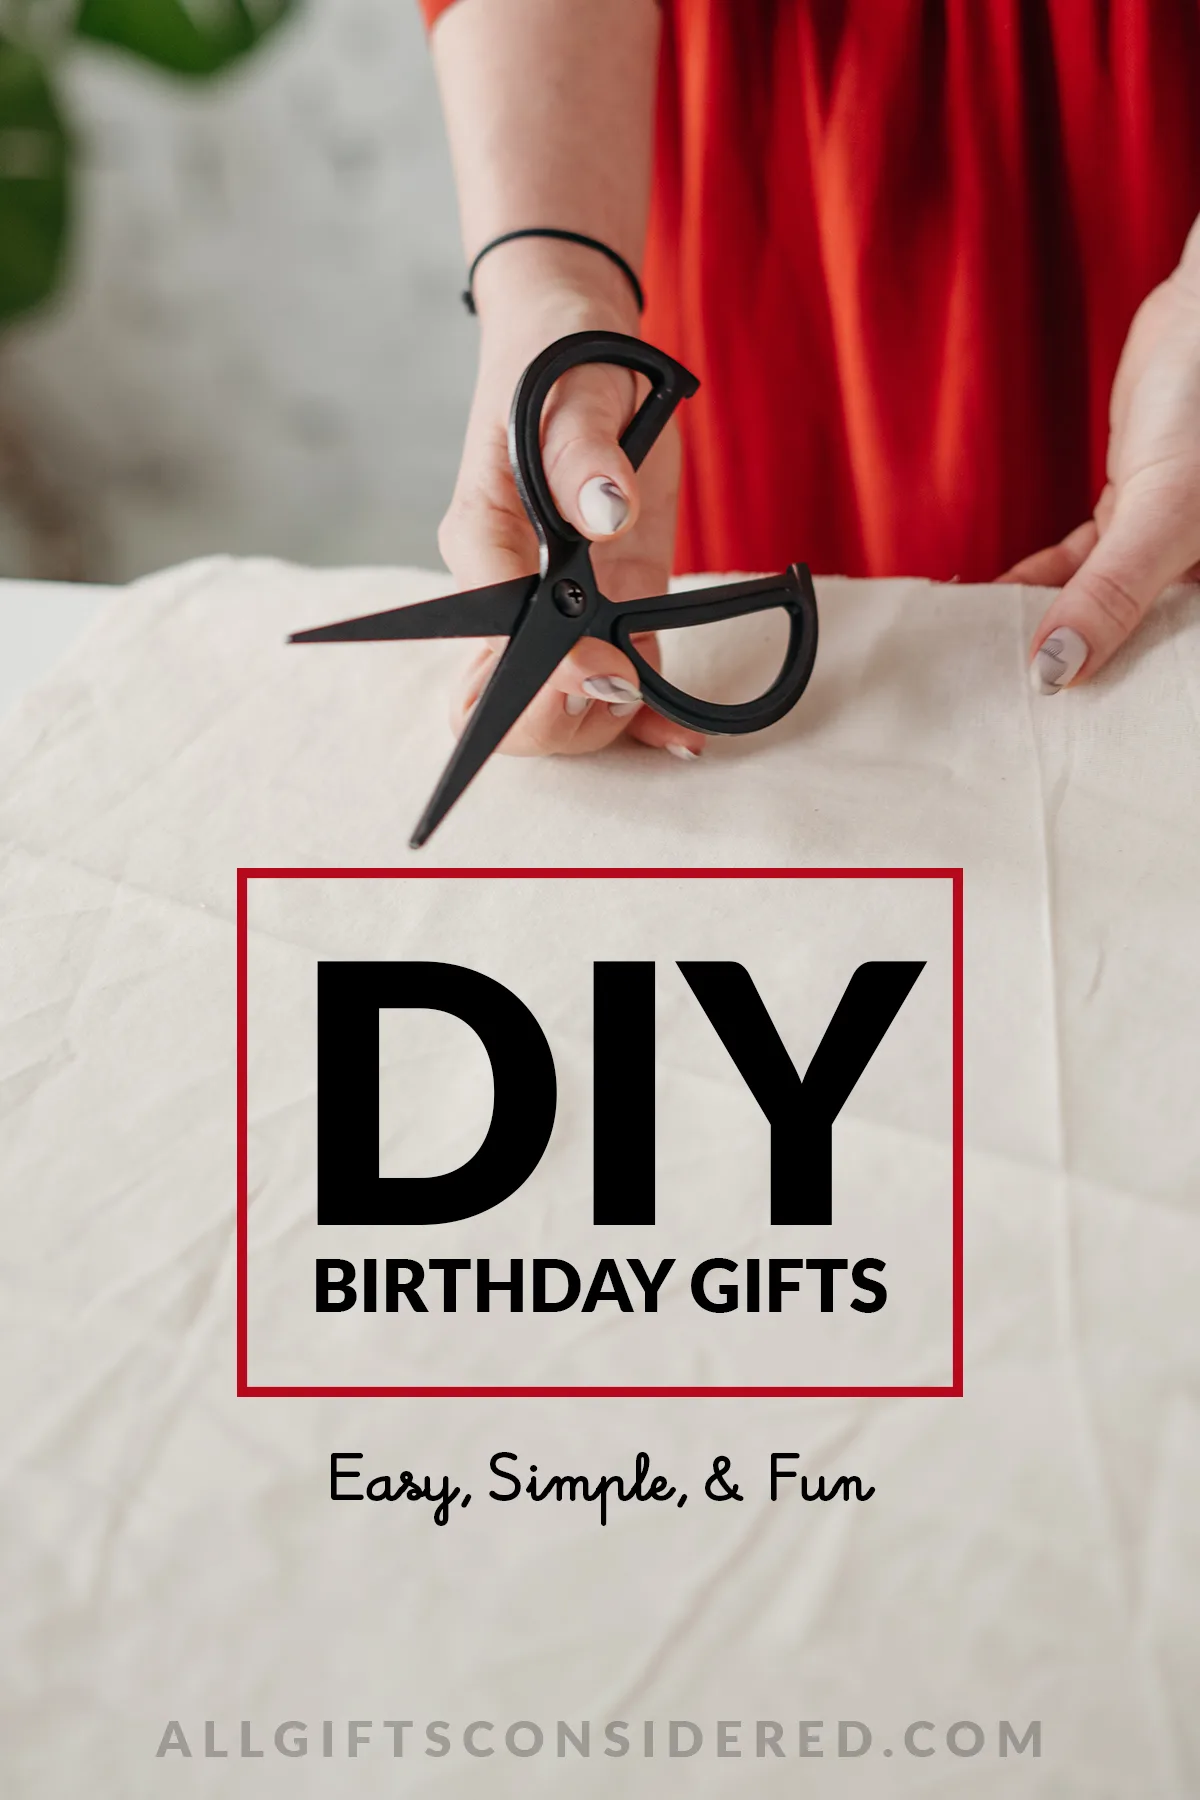 DIY Birthday Gifts - Feature Image